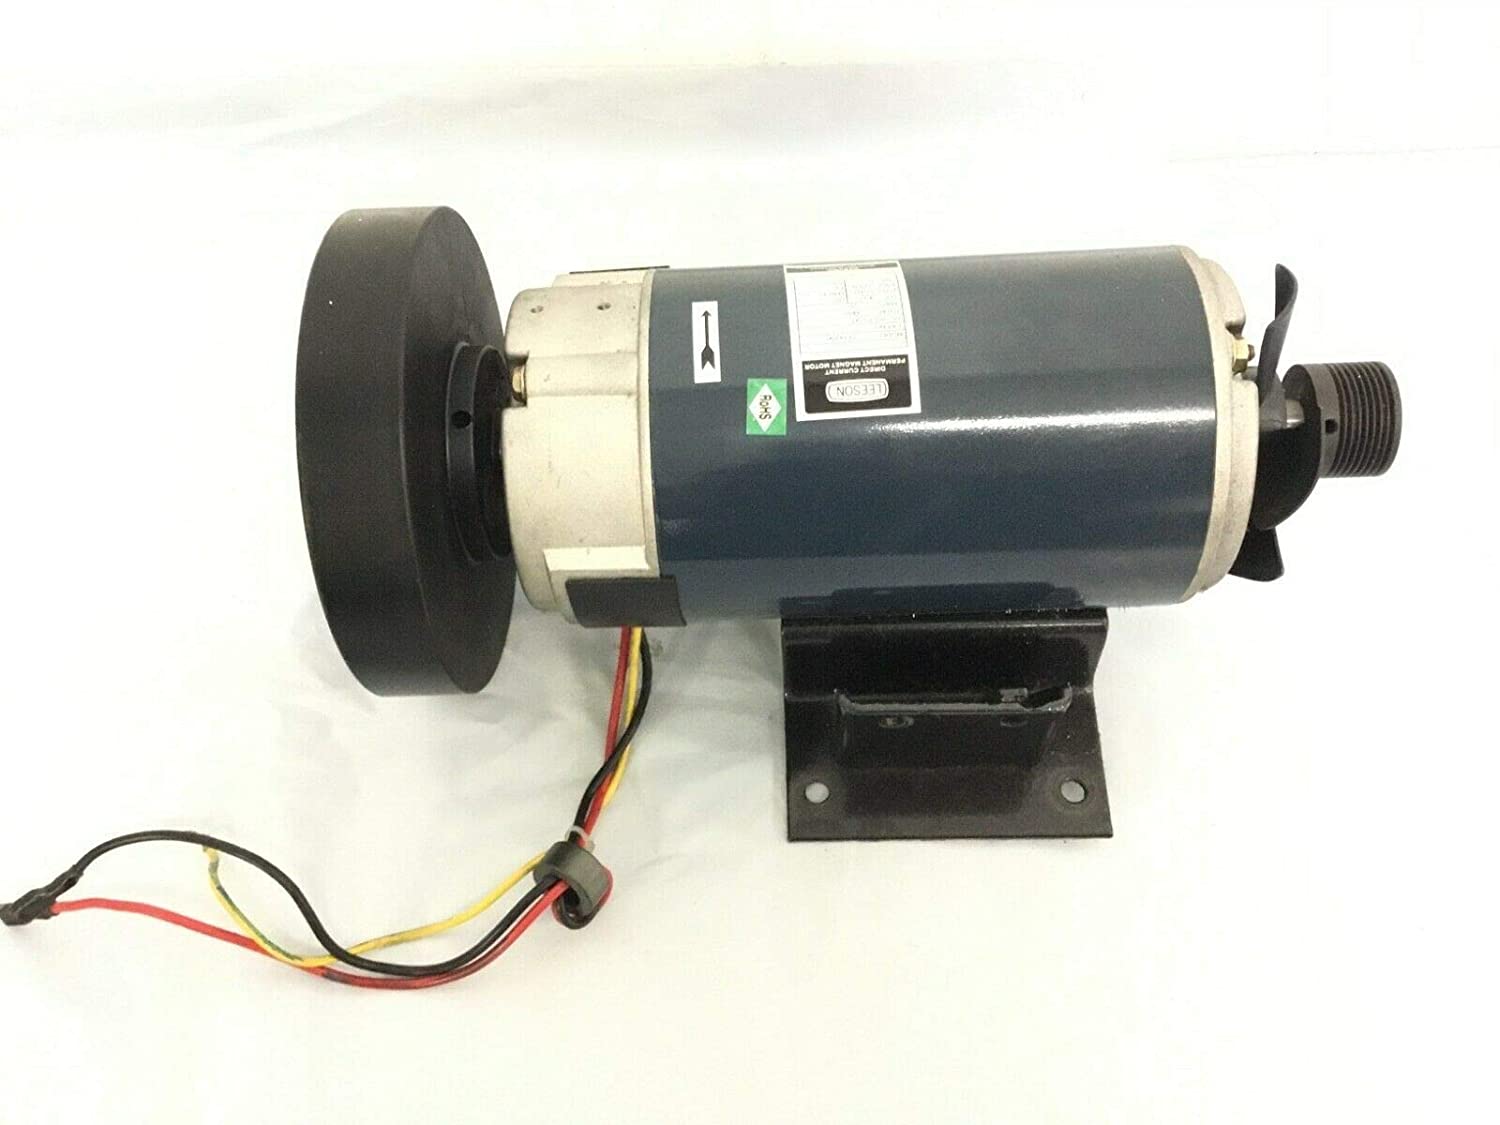 DC Drive Motor 111112536 Assembly with Mount Works with Smooth Fitness 9.65 LC or 9.65 LCi Treadmill Leesont (Used)